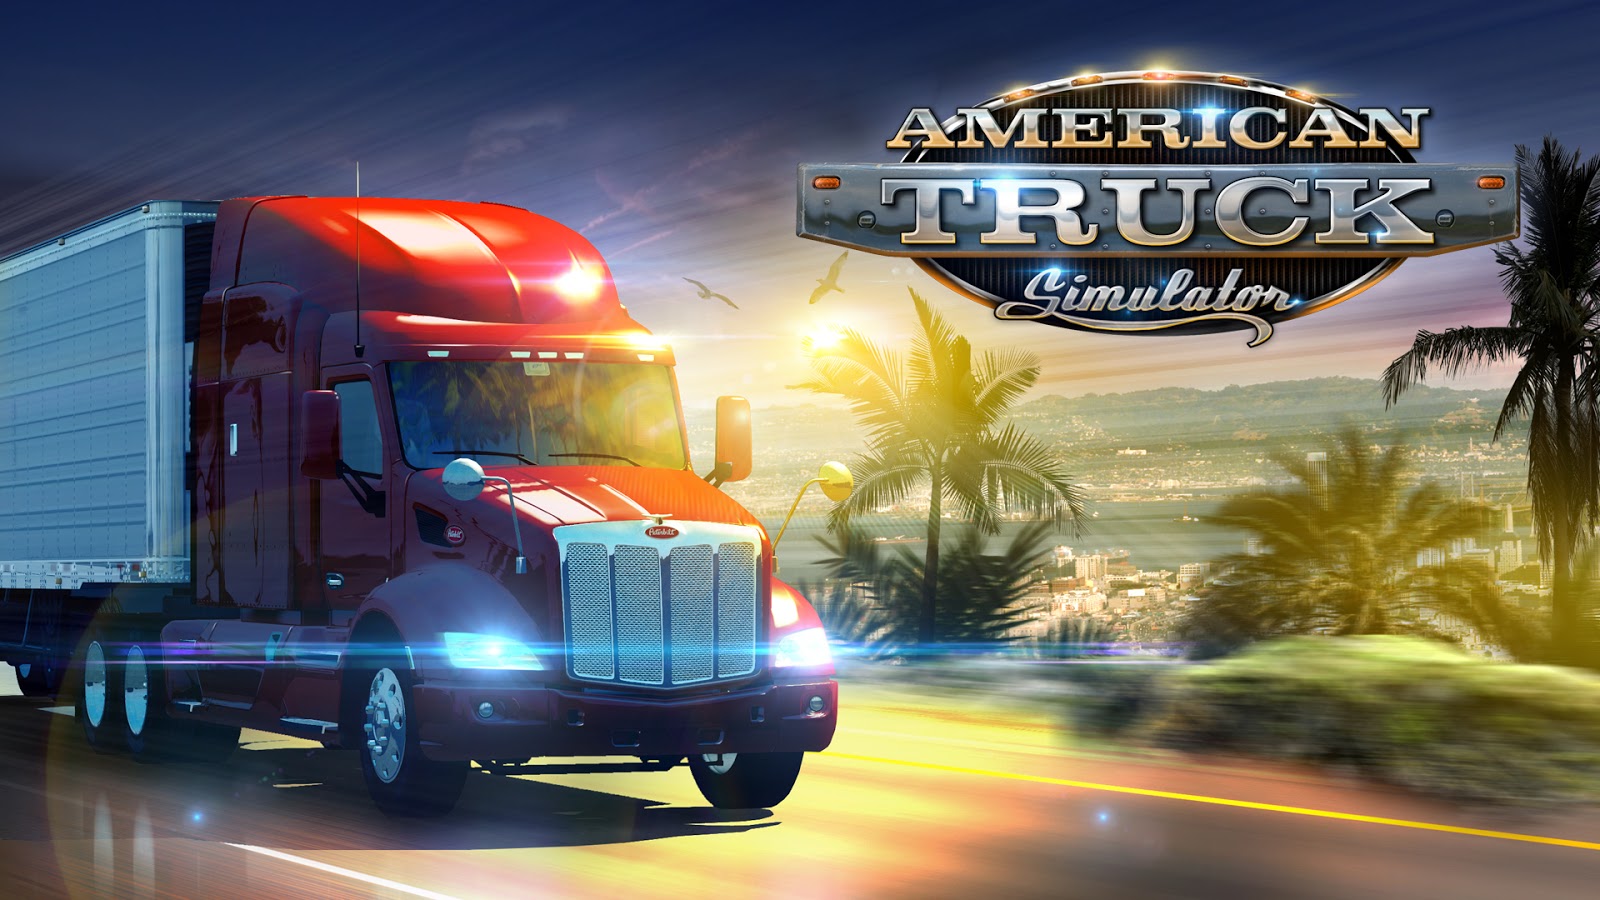 Be ready for American Truck Simulator Multiplayer